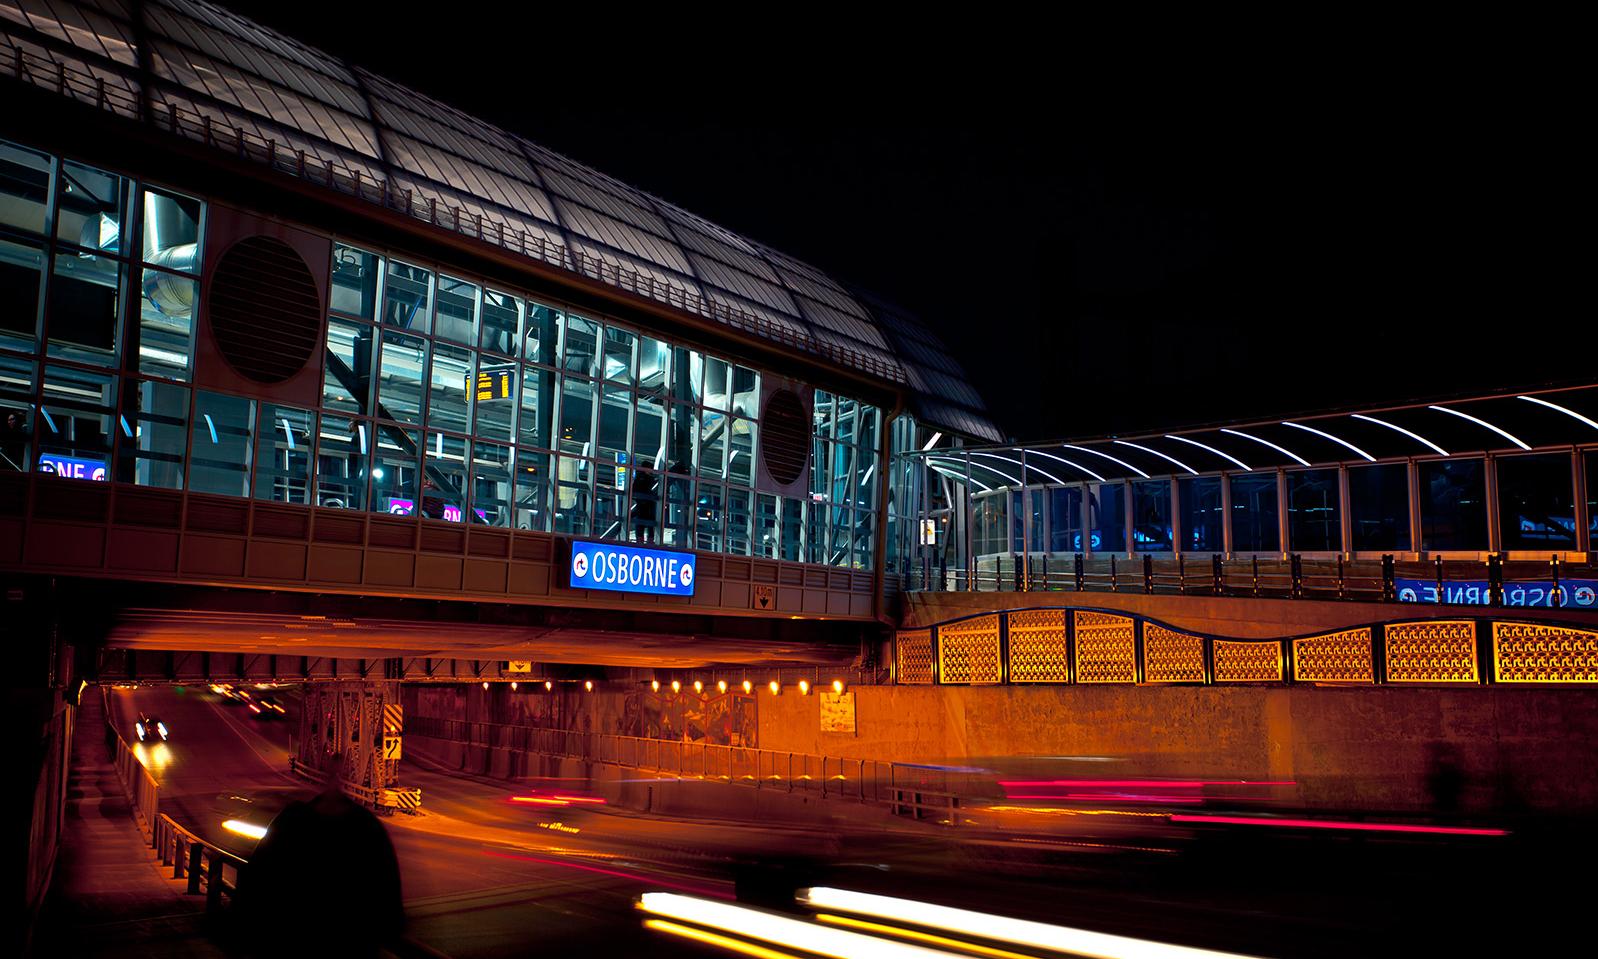 Osborne Bus Rapid Transit Station. The station at night from the street showing how the traffic disappears into an underpass below the illuminated station. 